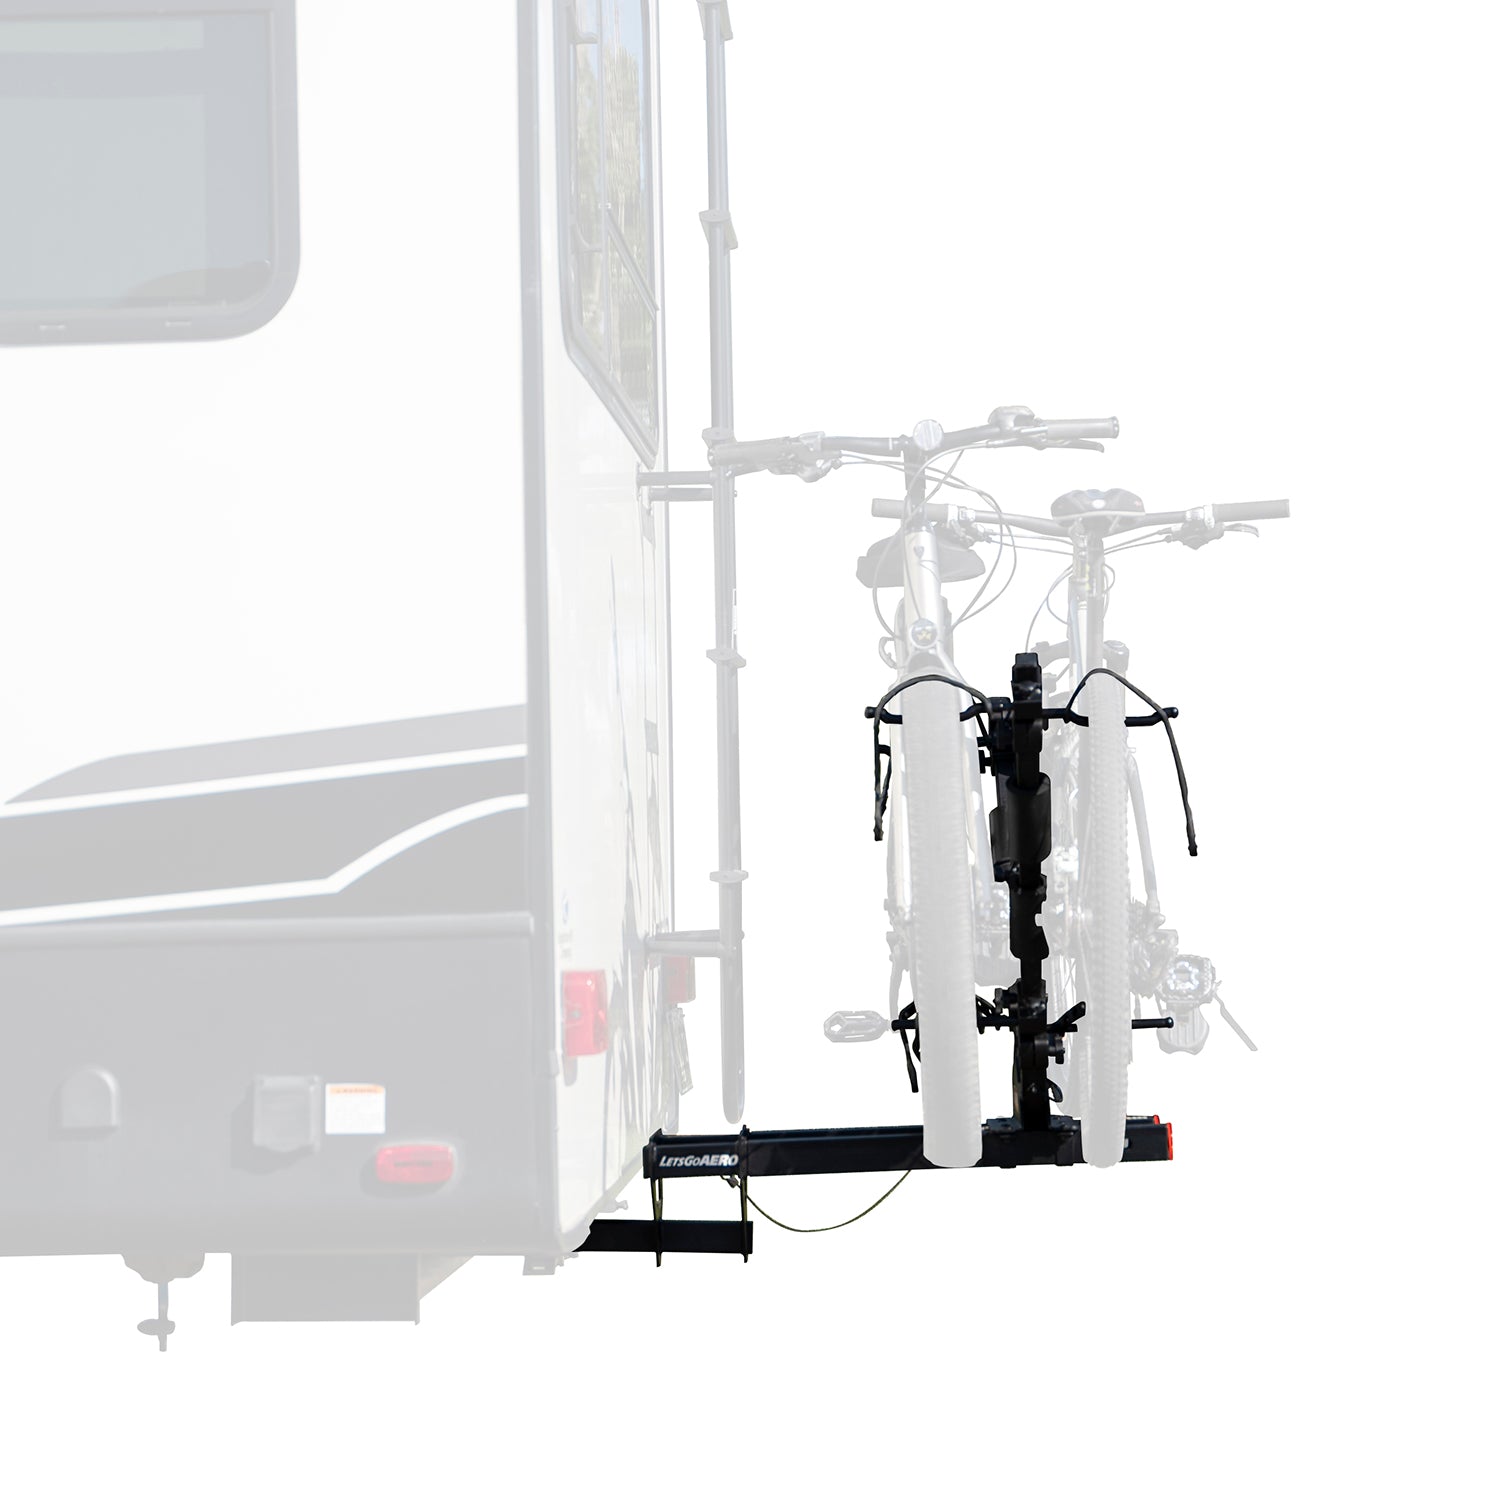 Introducing V-Tree Mobile Bicycle Storage Stands for Home, Garage & Of –  Let's Go Aero